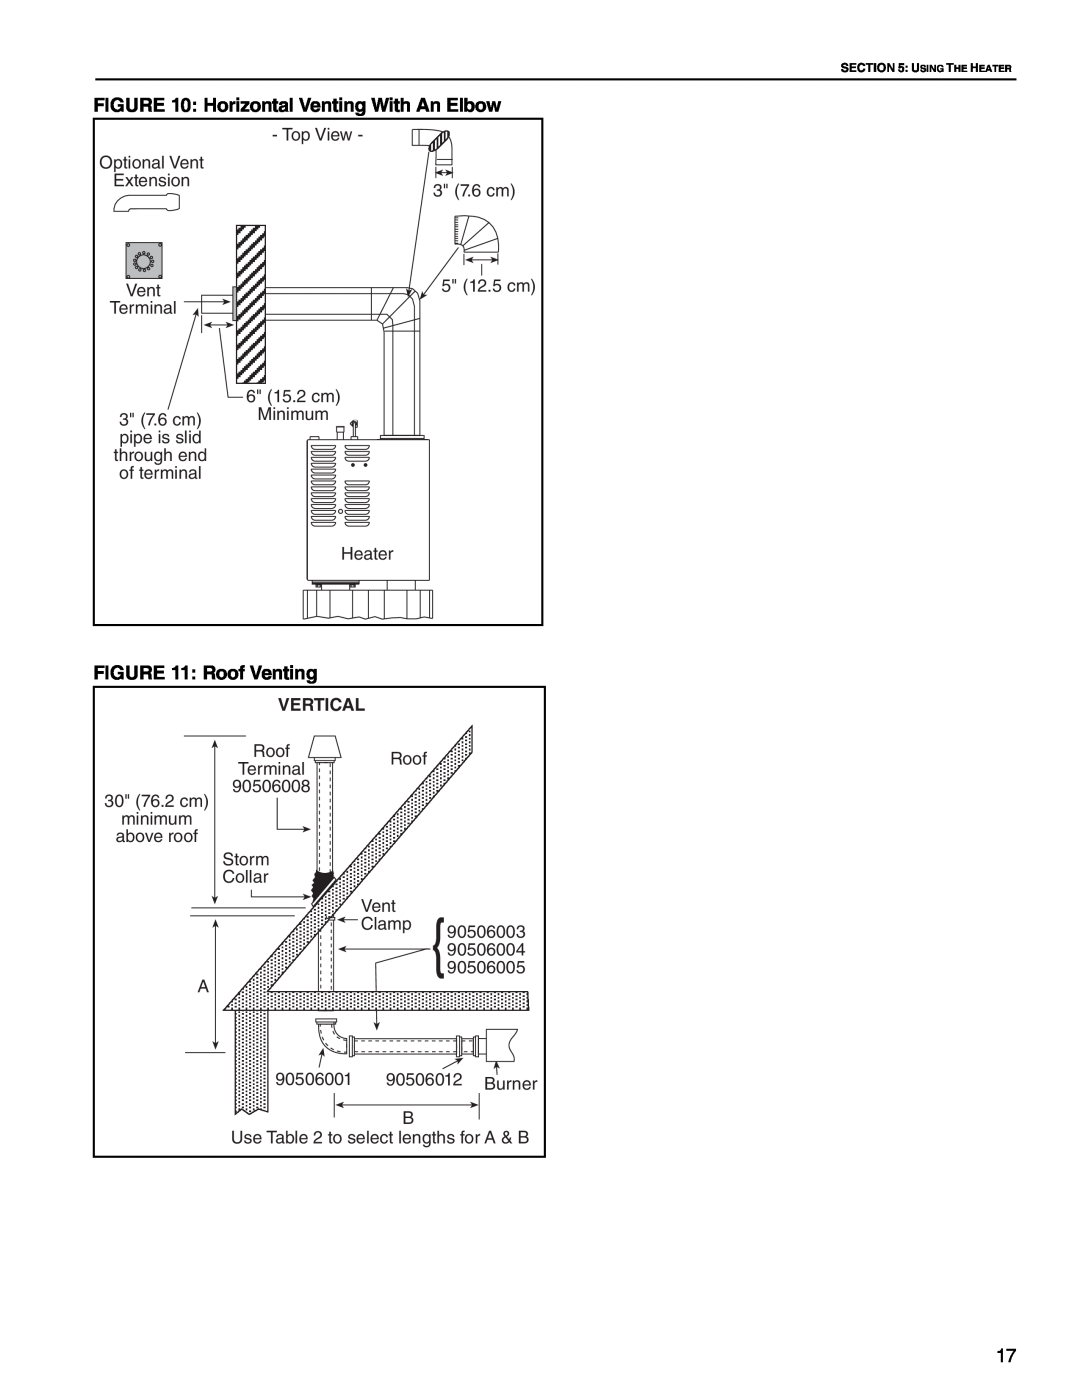 Roberts Gorden CGTH-40, CGTH-30, CGTH-50 service manual Horizontal Venting With An Elbow, Roof Venting, Vertical 